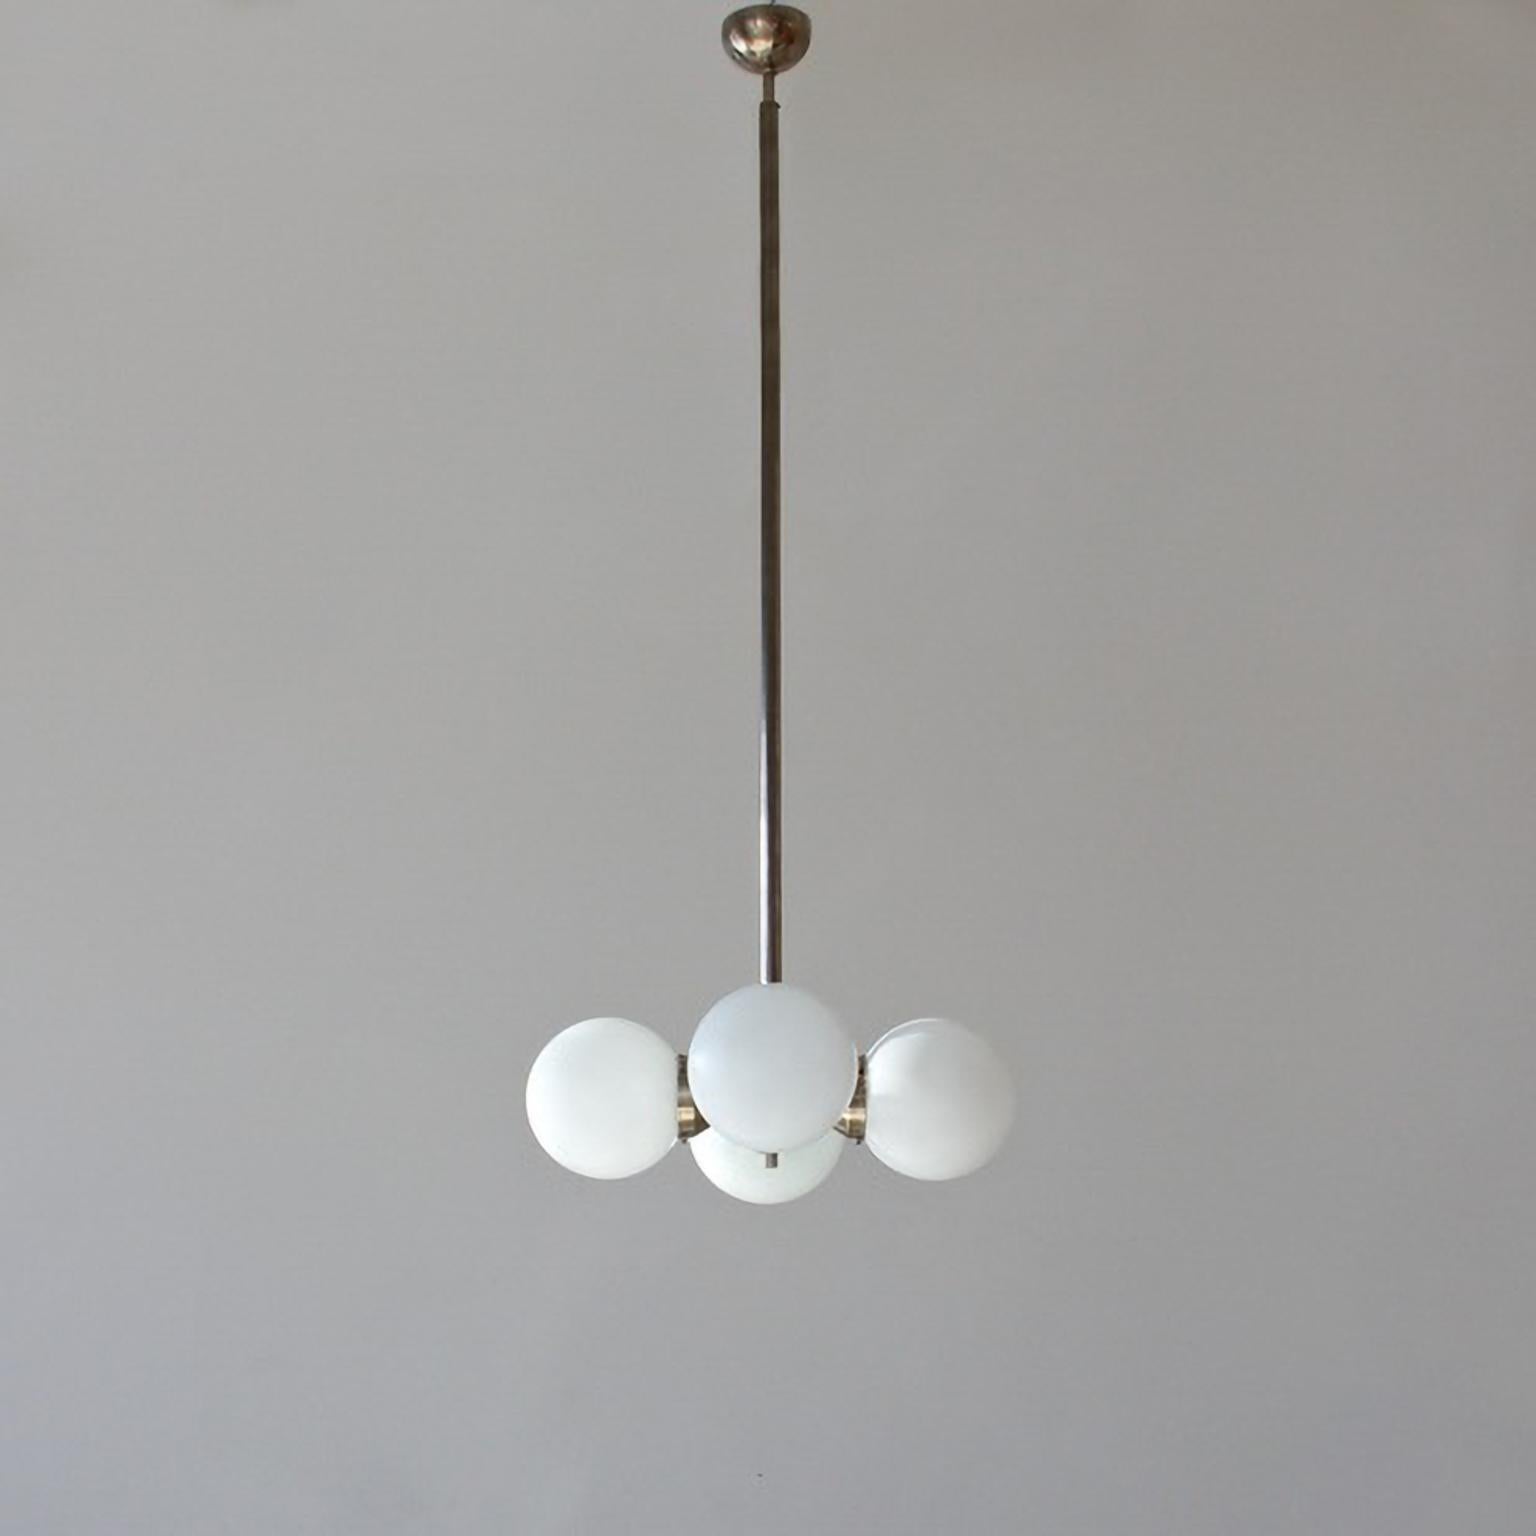 German Modernist Pendant Light with 4 Opaline Glass Bulbs, Nickel Plated Brass c. 1930 For Sale